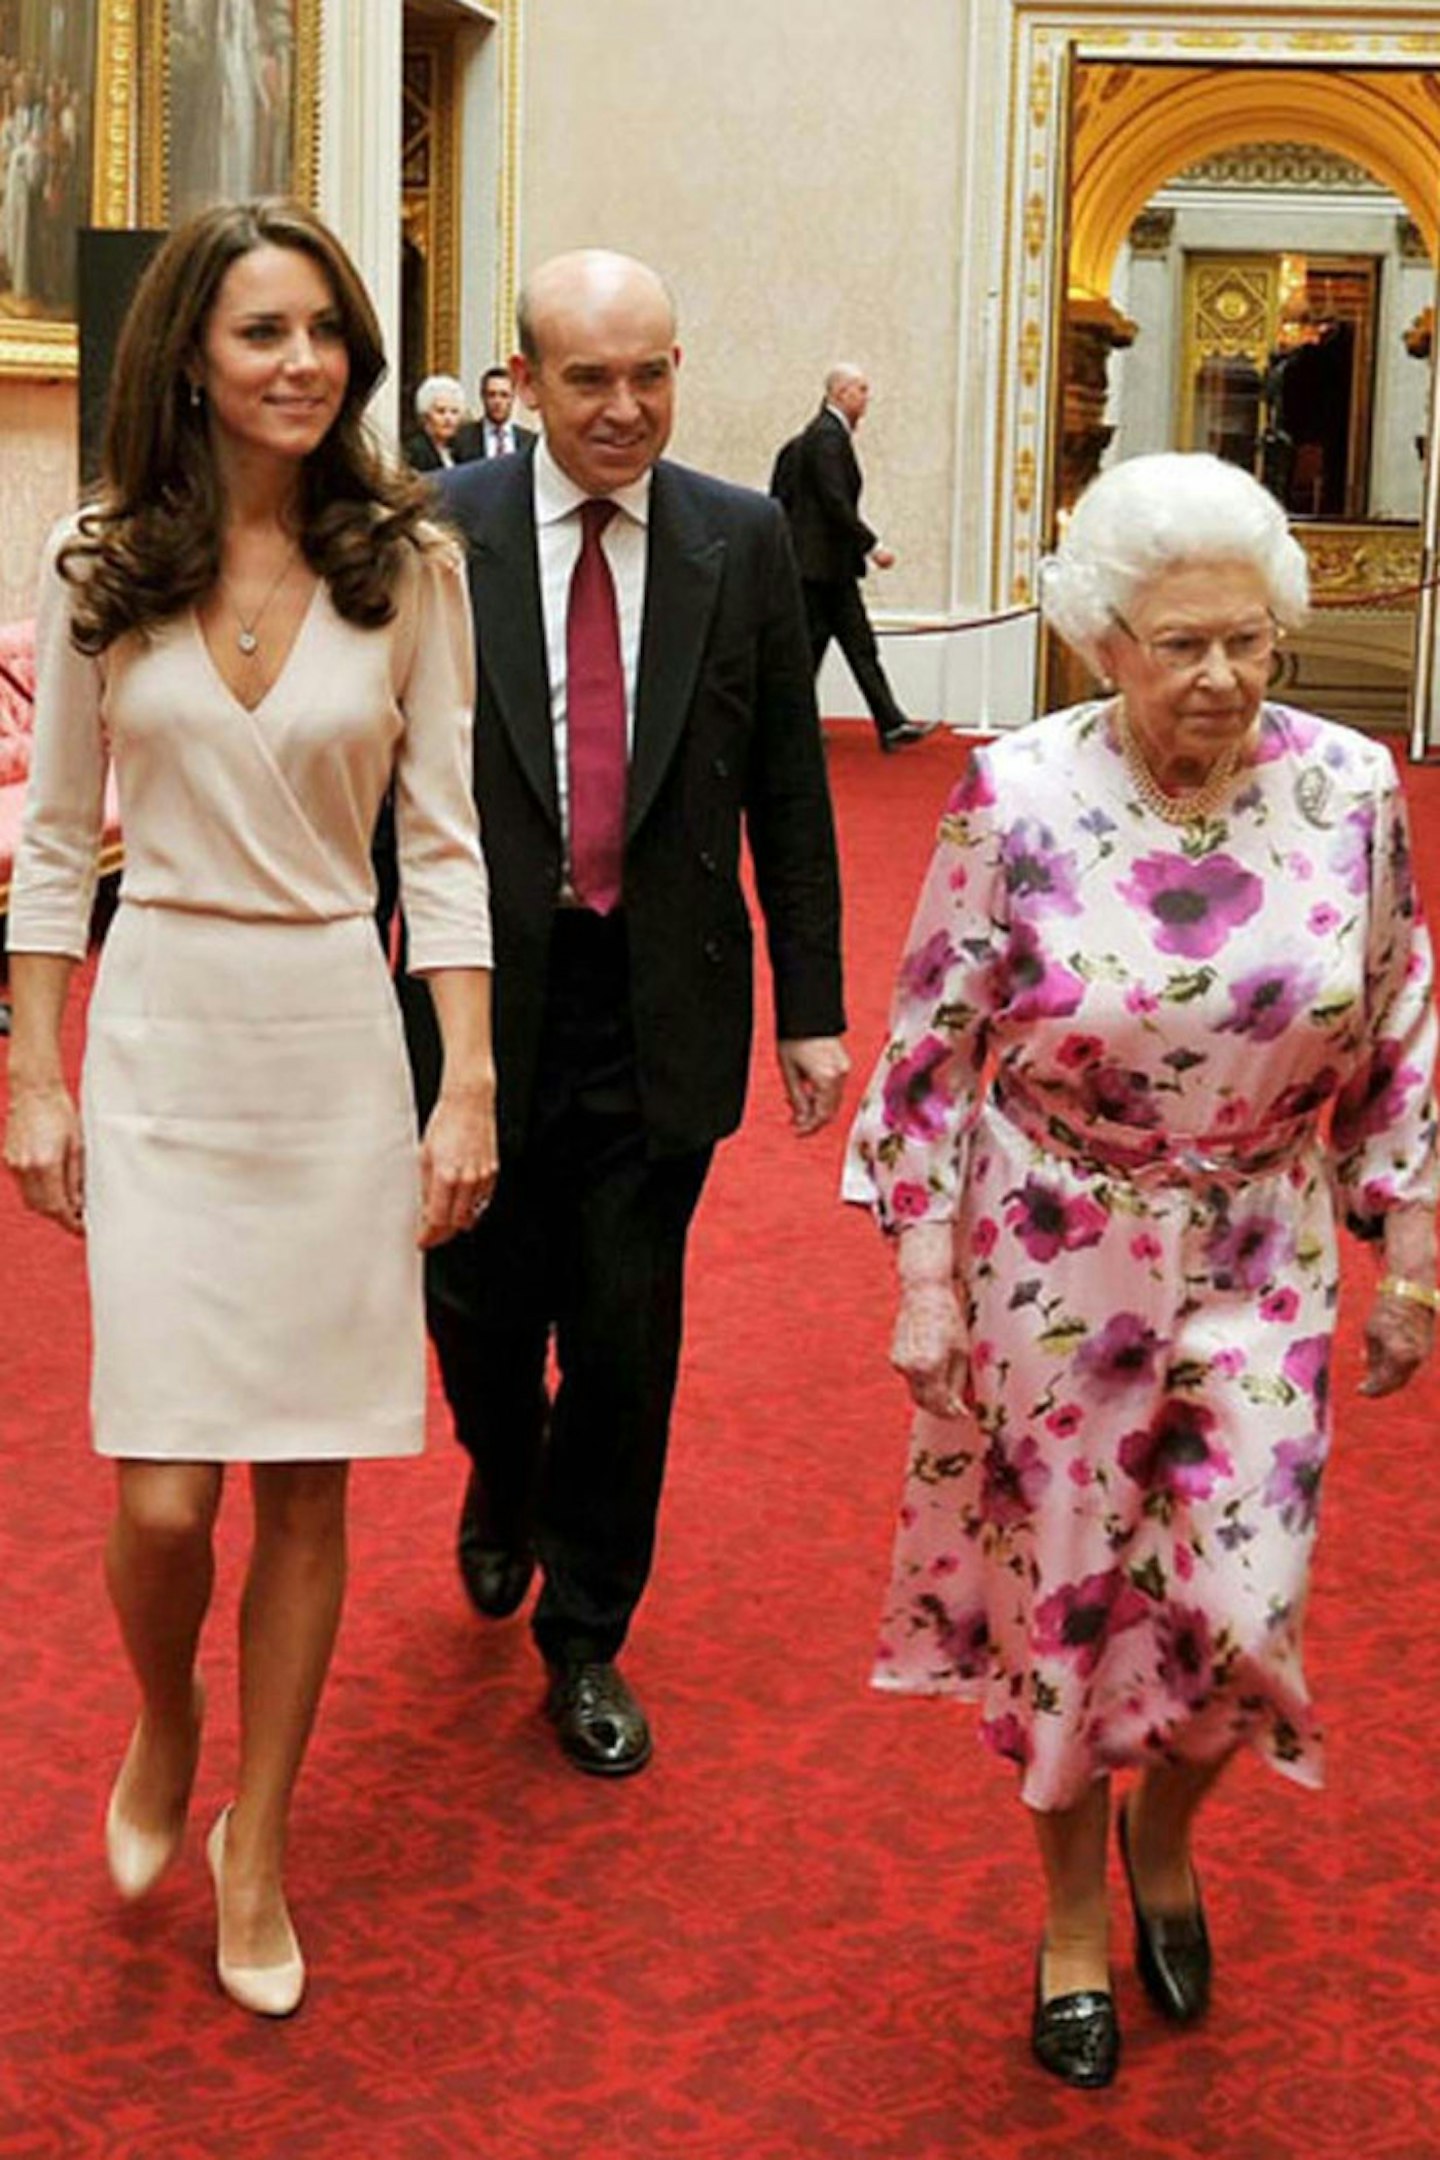 Kate Middleton touring the exhibitions for the summer opening of Buckingham Palace, July 2011